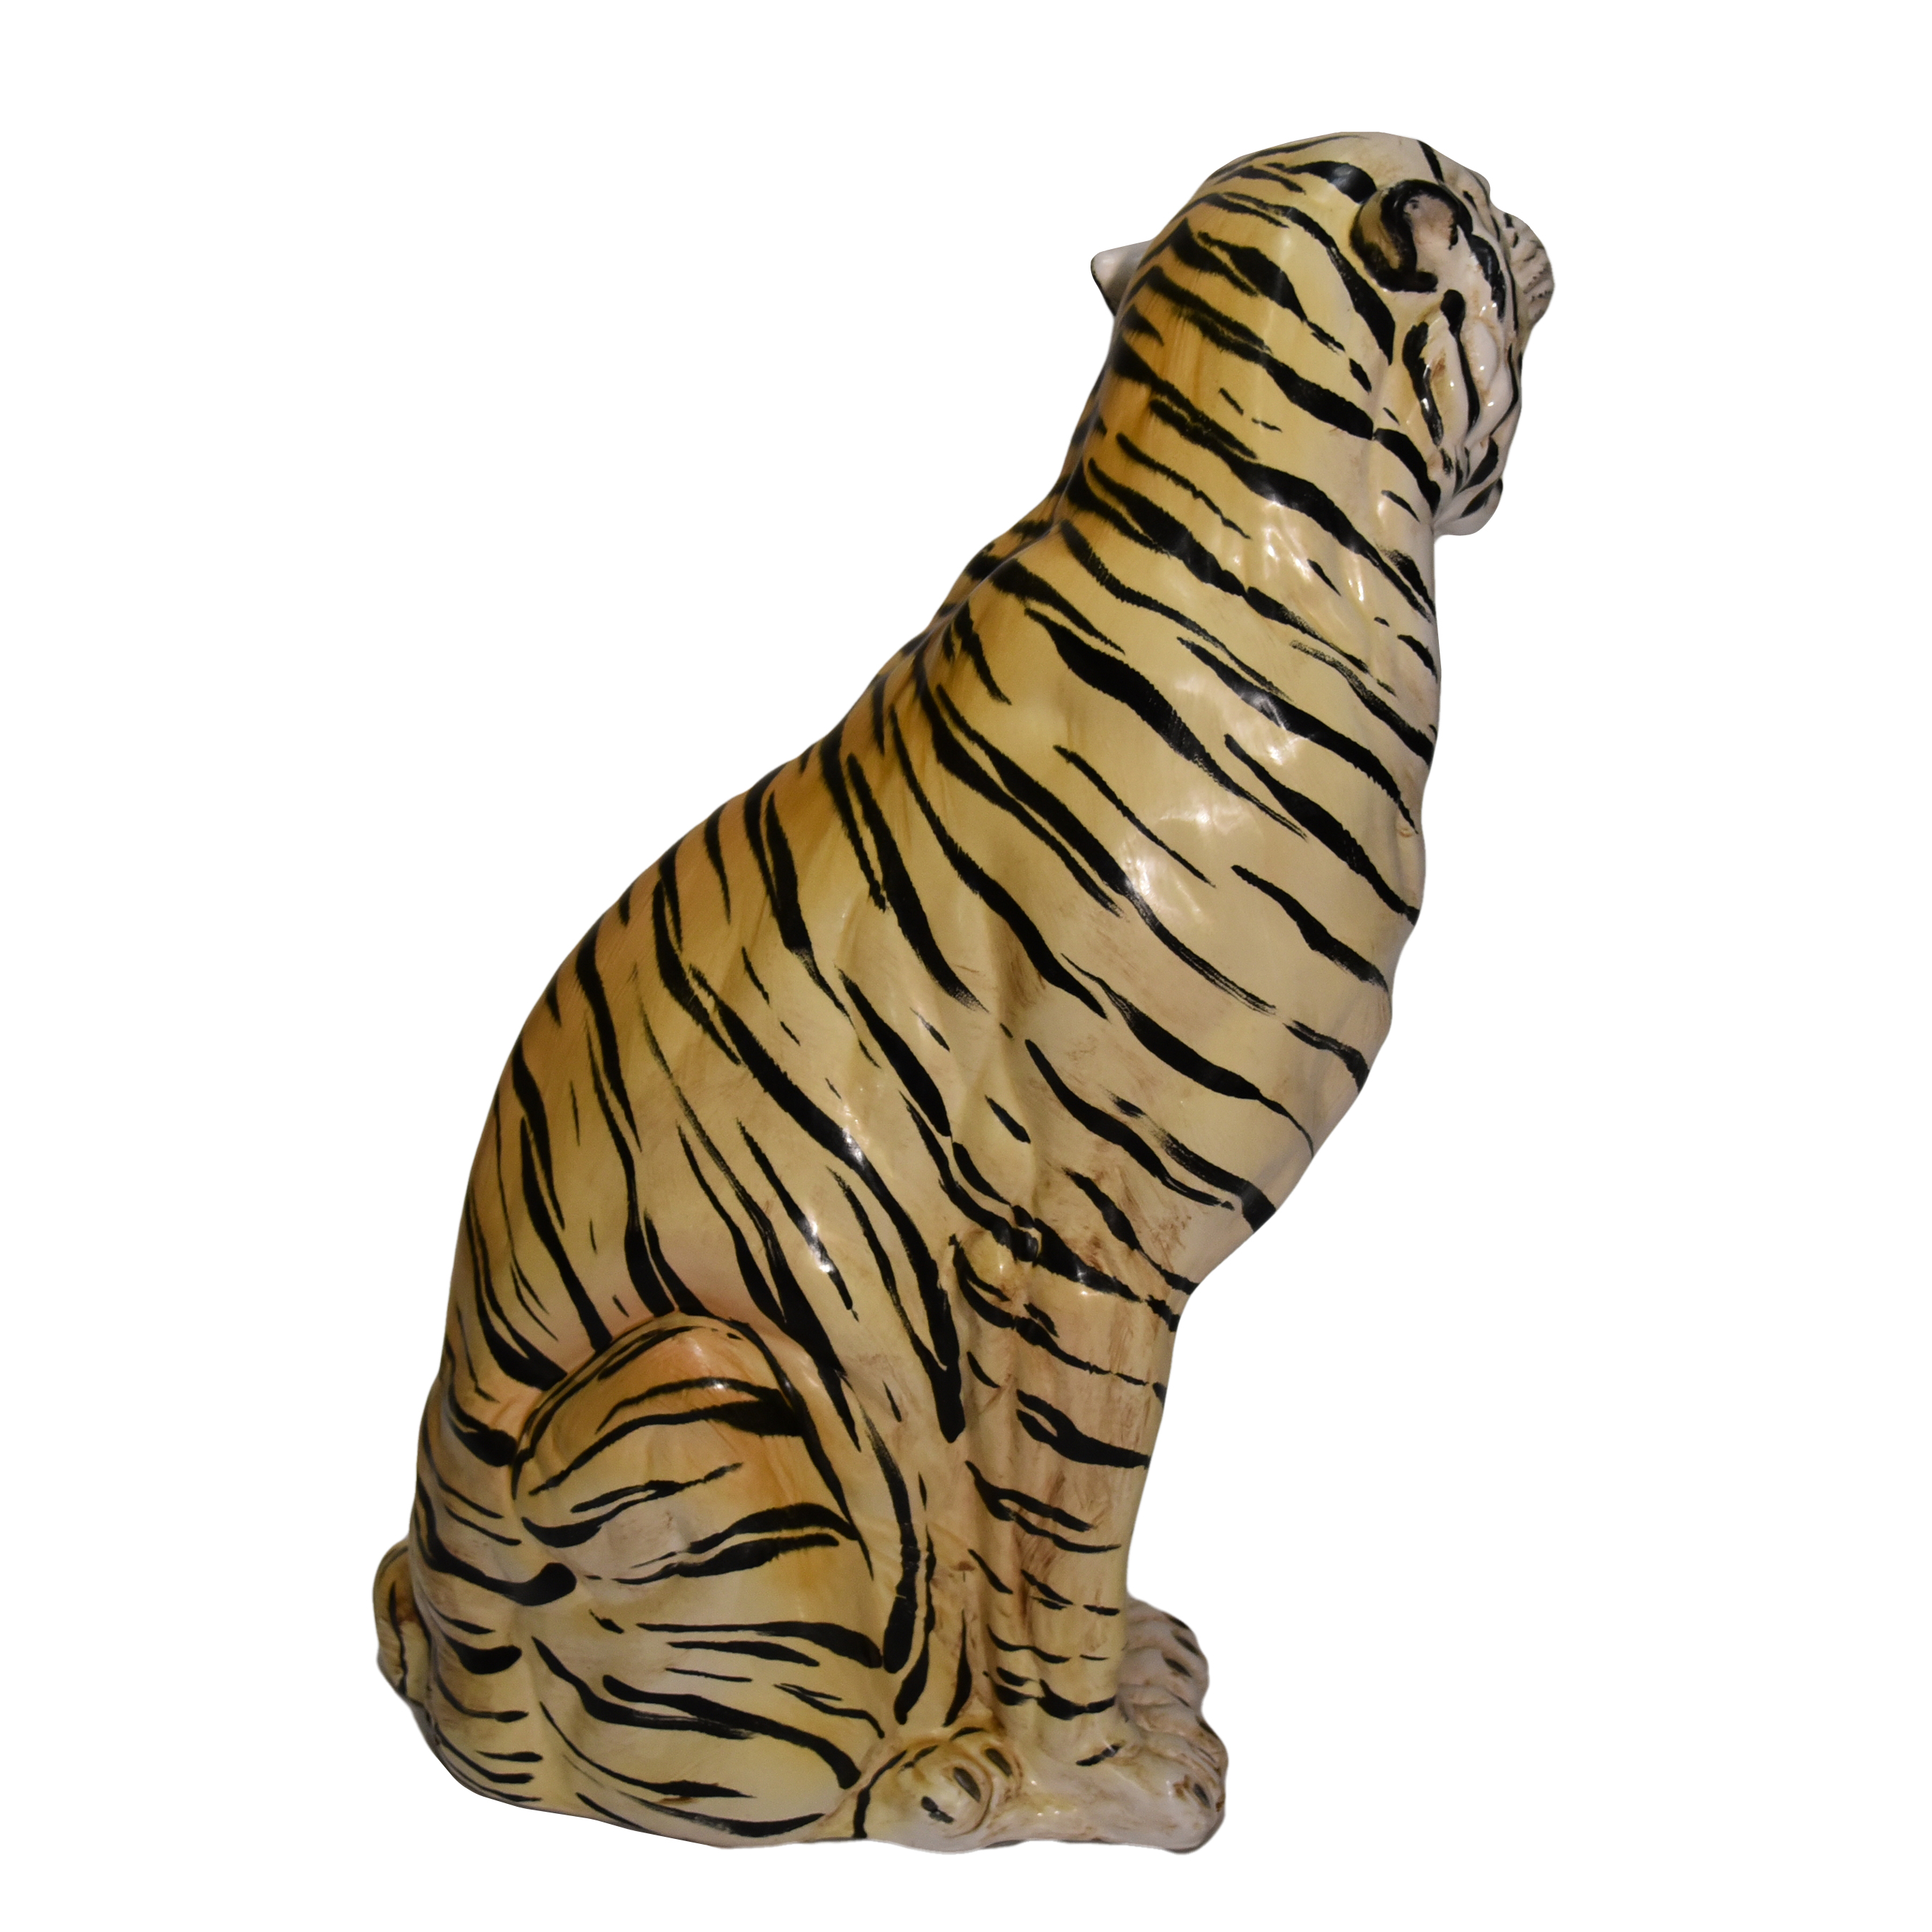 Ceramic reproduction of a roaring tiger - MARIONI - Furniture, lighting and  accessories made in Italy